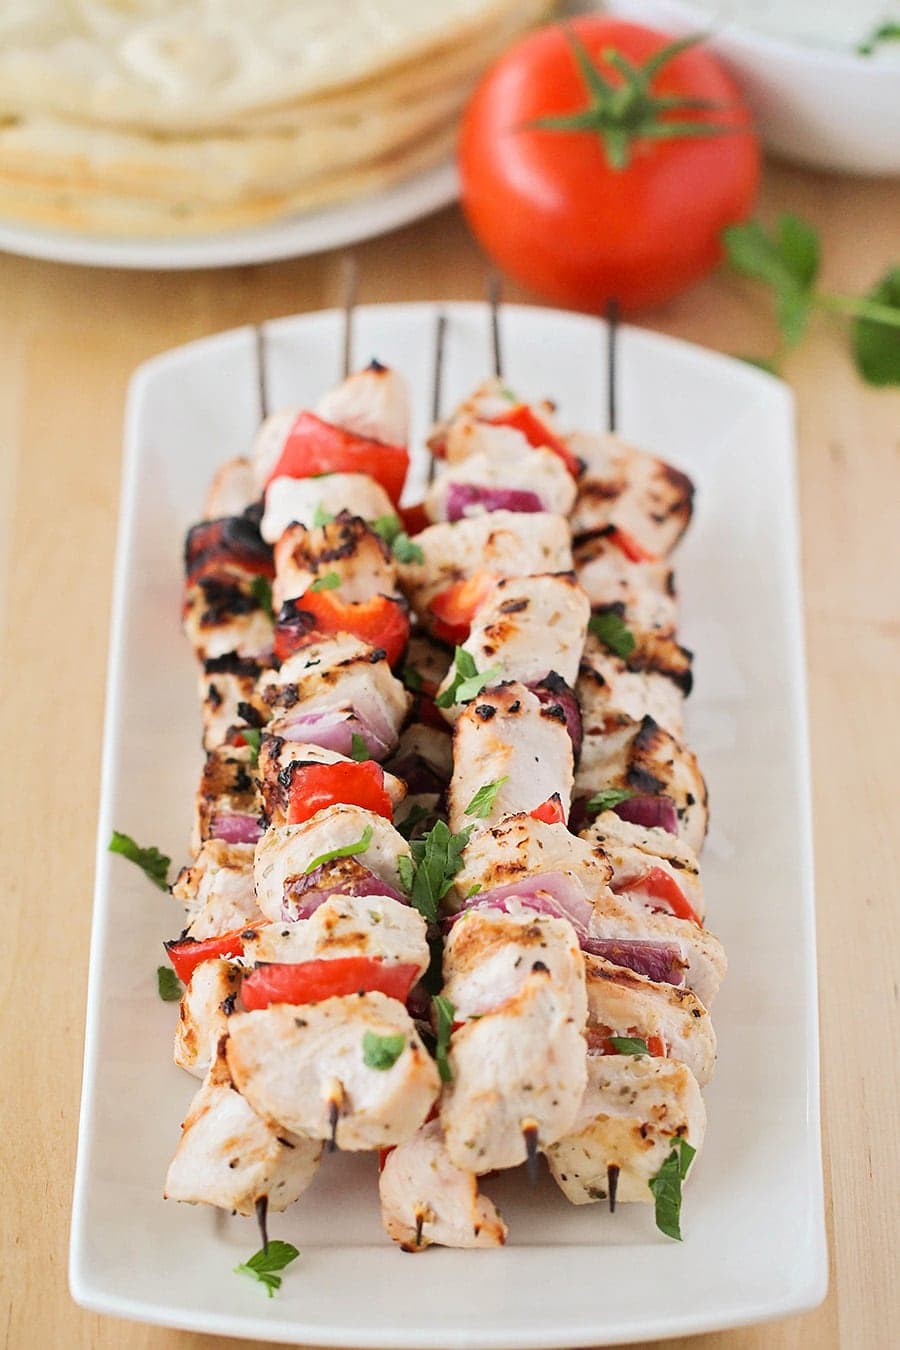 4th of July Recipes - Chicken souvlaki on skewers.